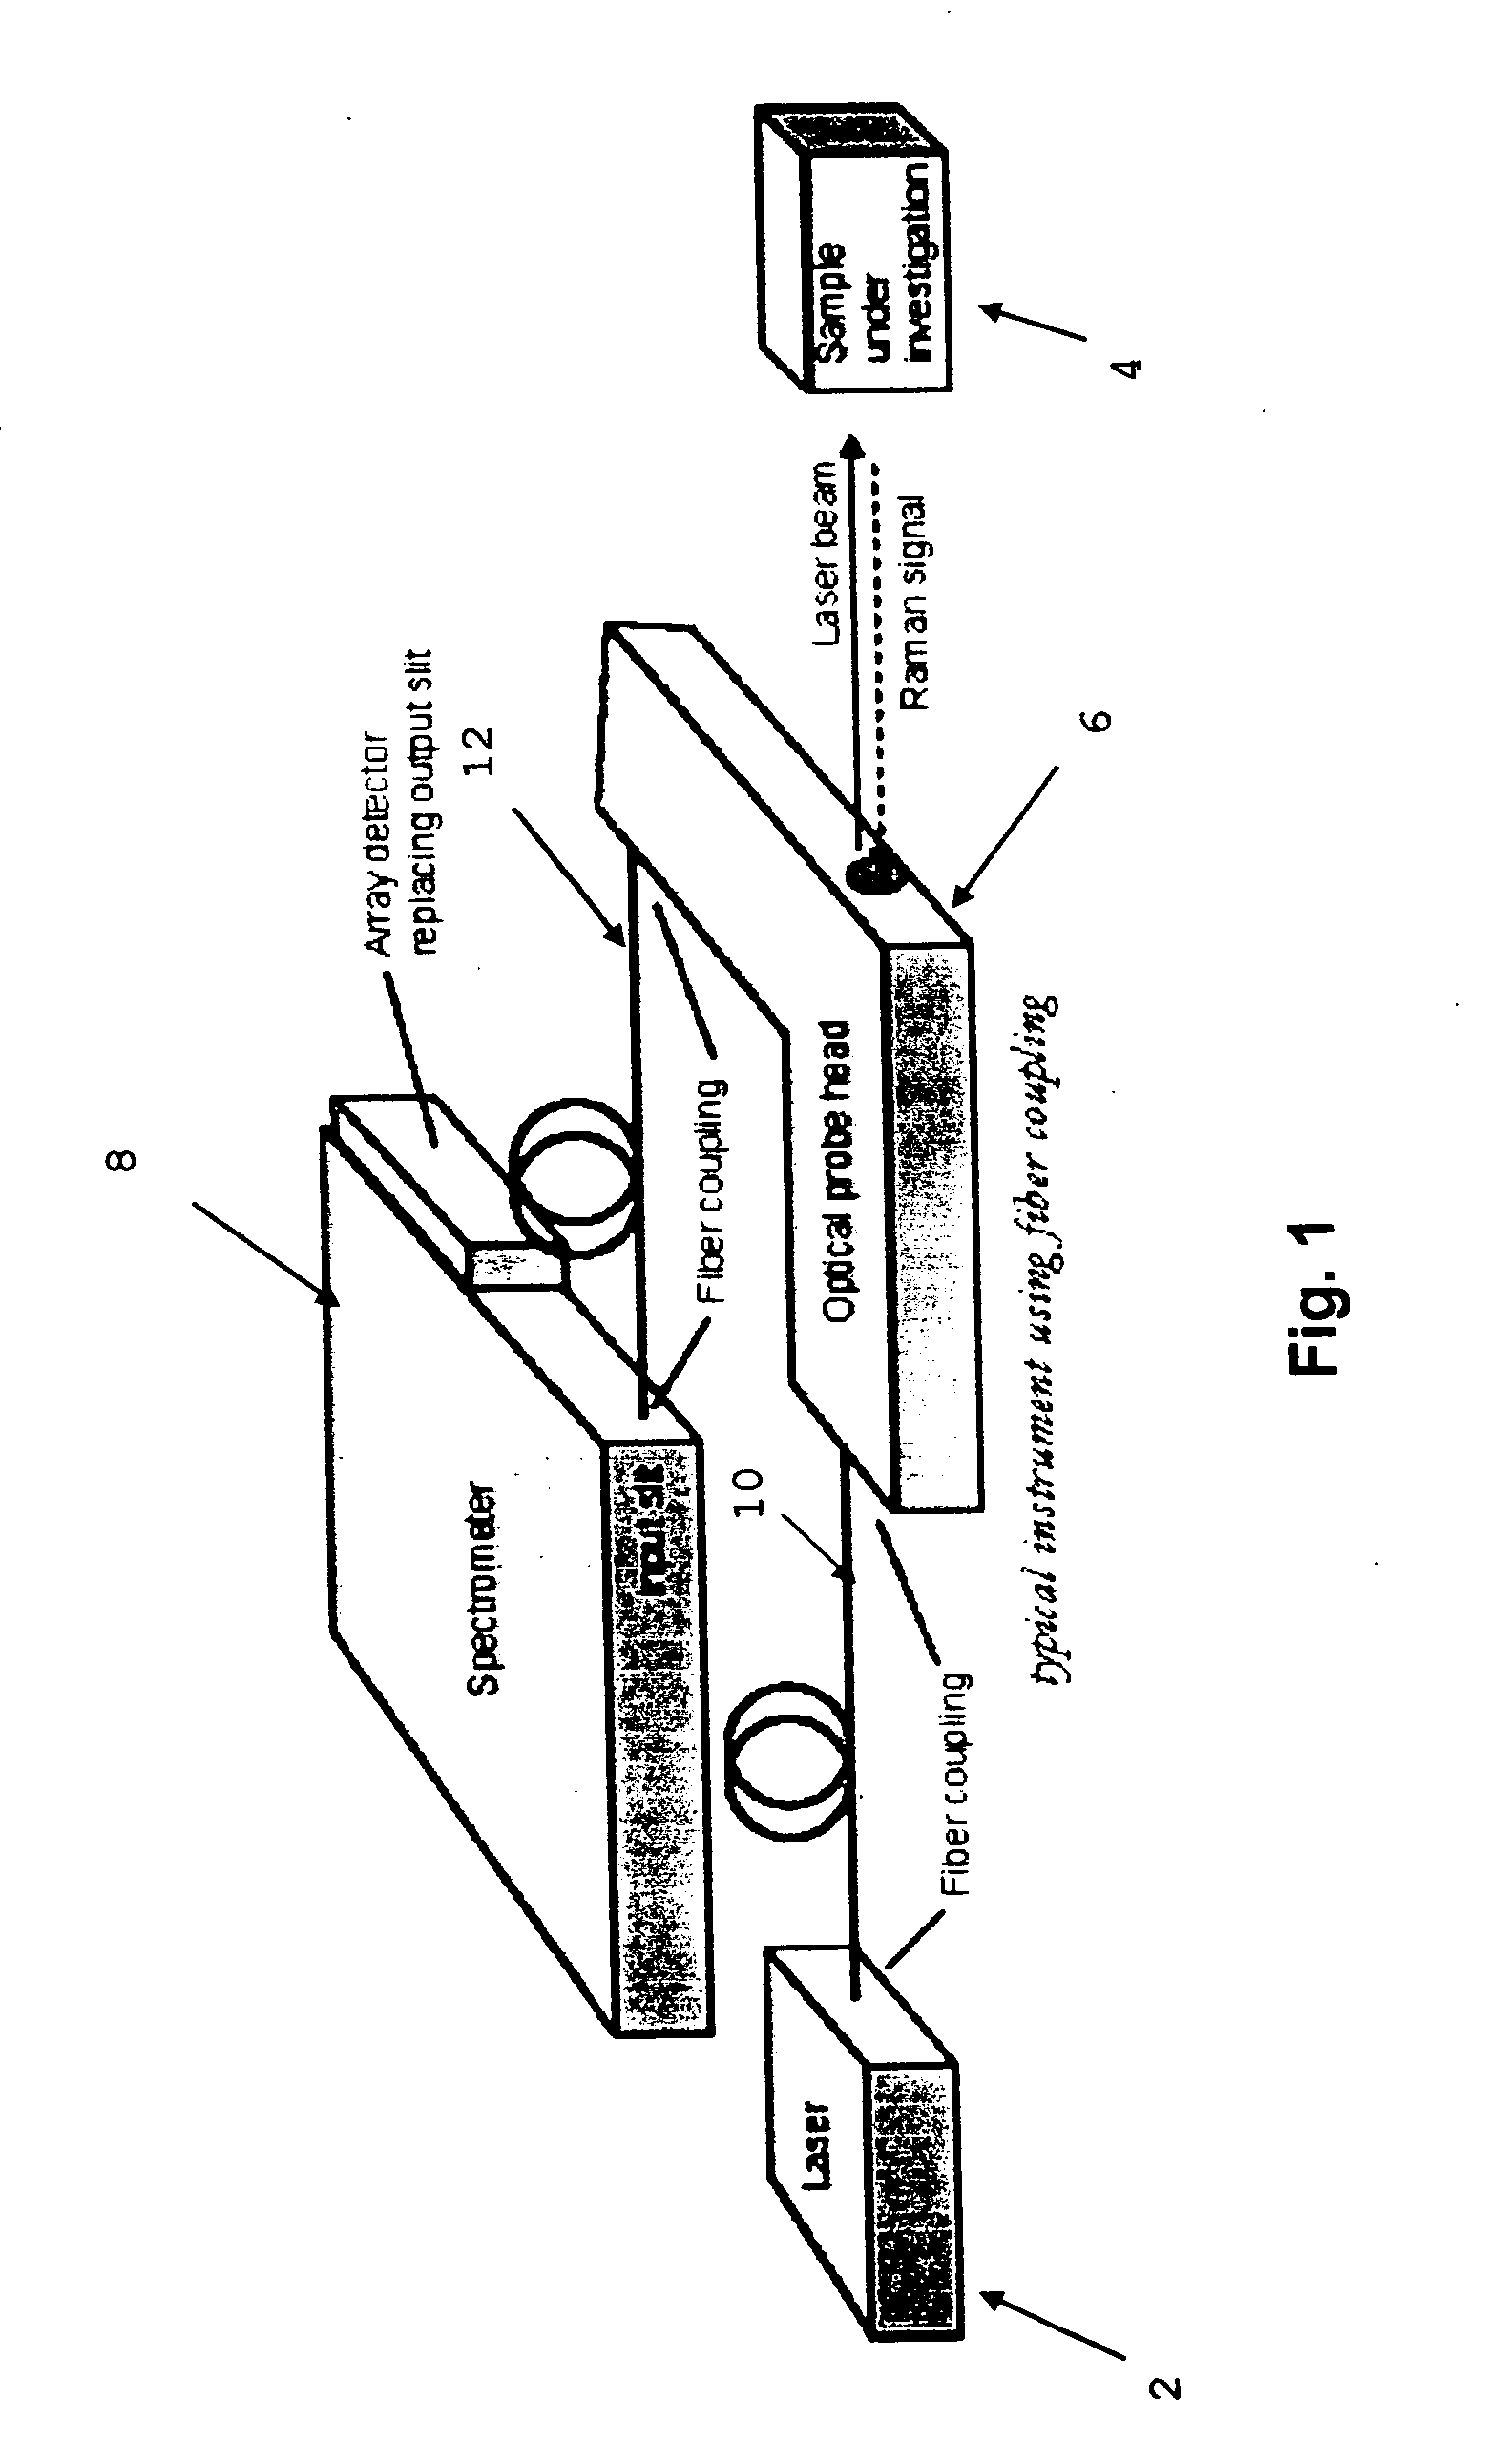 Use of free-space coupling between laser assembly, optical probe head assembly, spectrometer assembly and/or other optical elements for portable optical applications such as Raman instruments